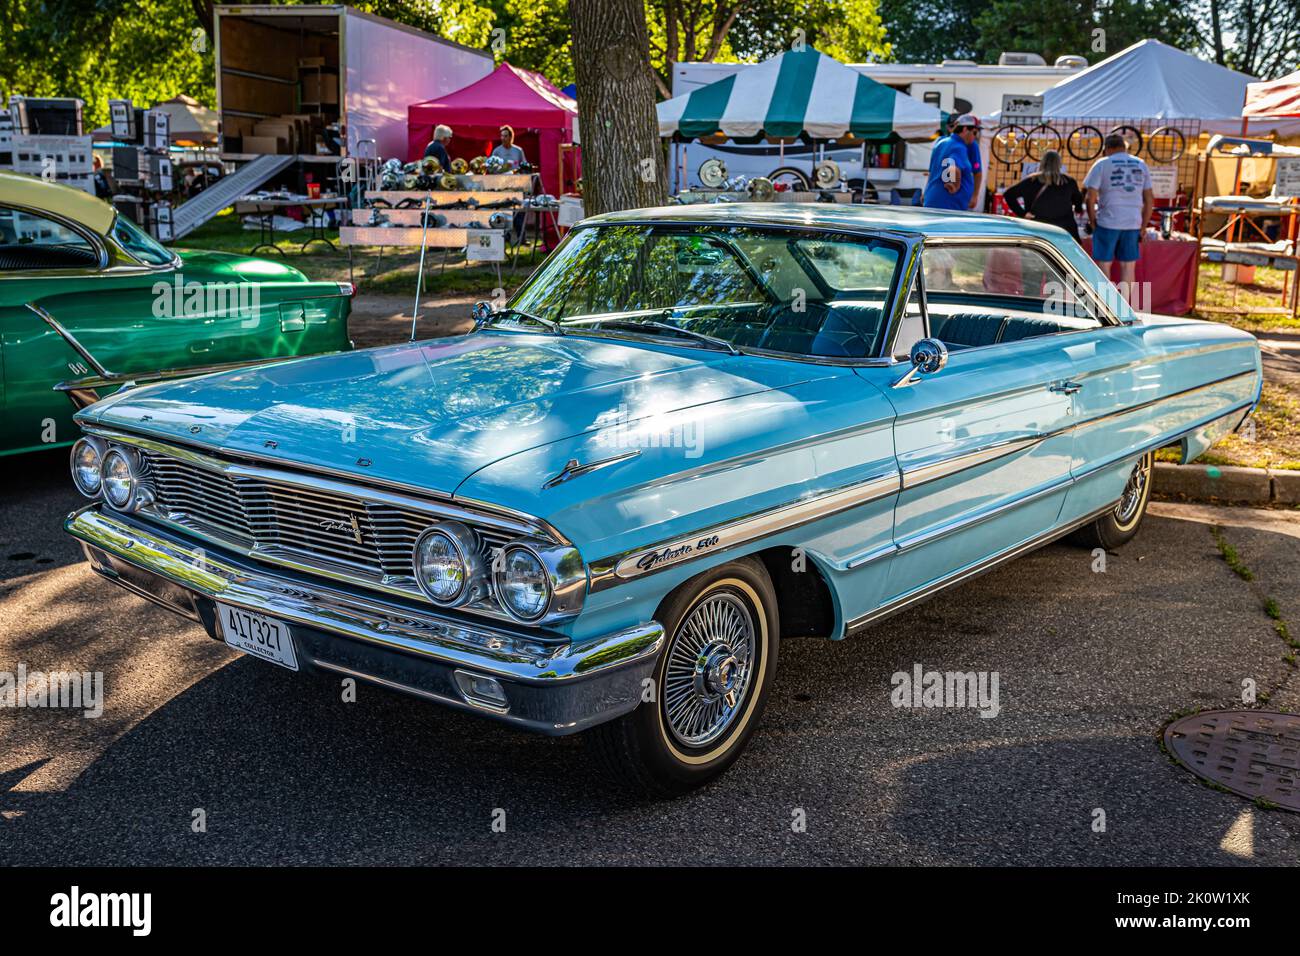 Falcon Heights, MN - June 18, 2022: High perspective front corner view of a 1964 Ford Galaxie 500 2 Door Hardtop at a local car show. Stock Photo